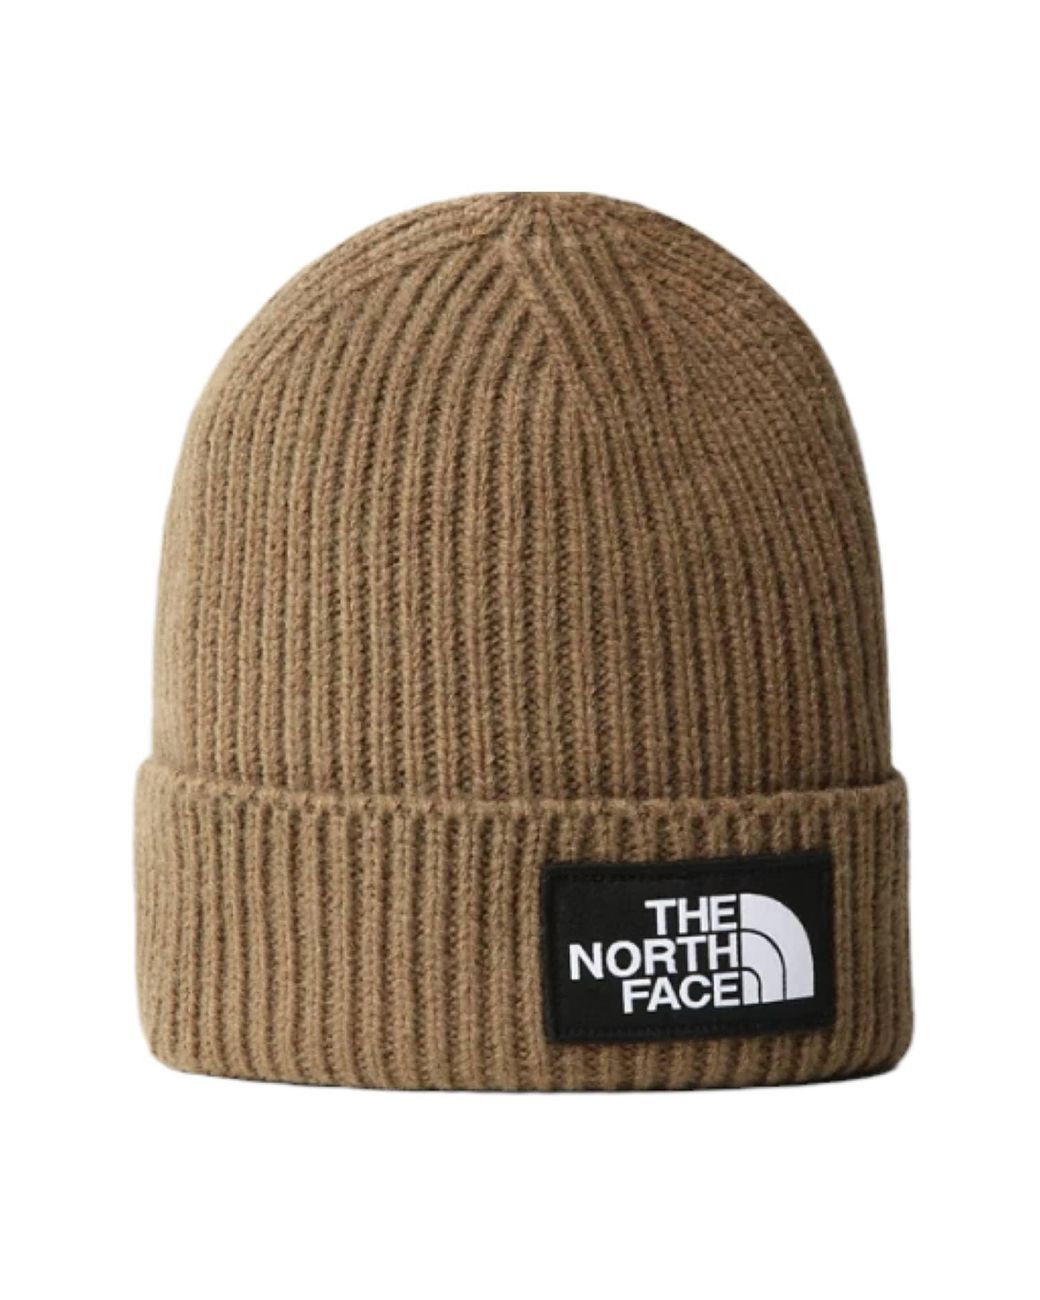 The North Face Cappello Tnf Logo Box Cuffed Military Olive for Men | Lyst